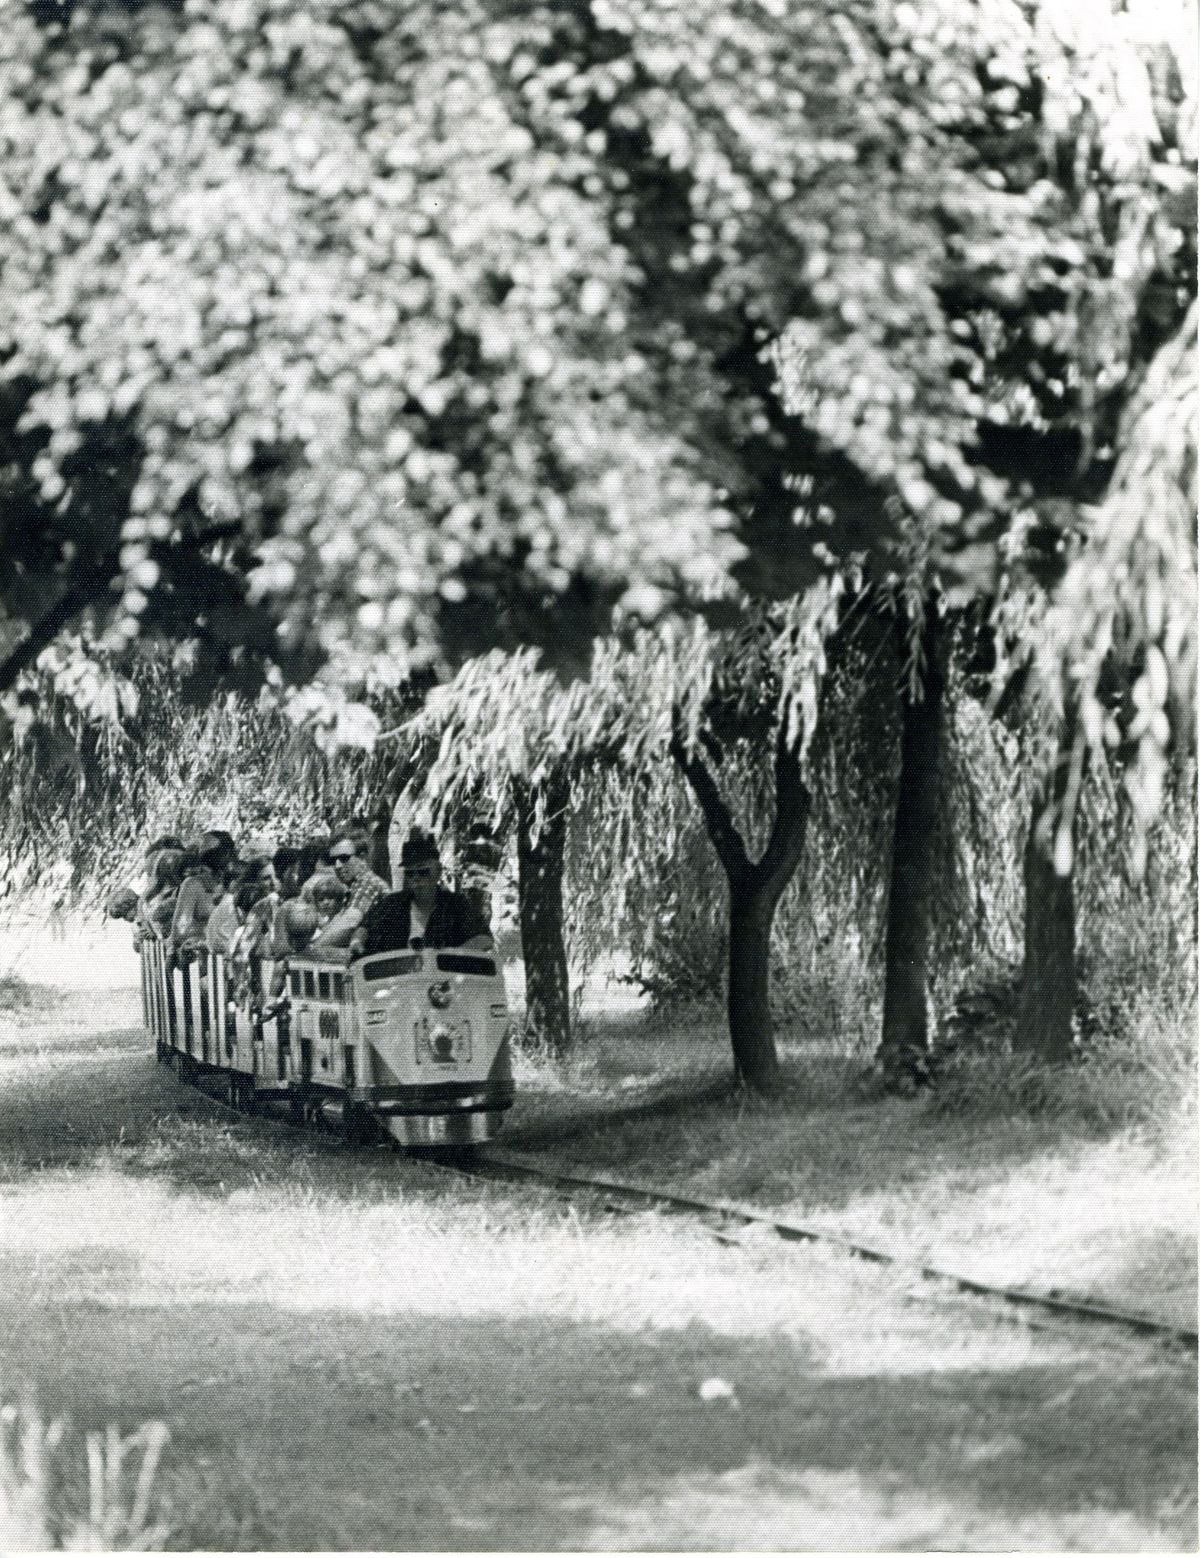 The Drayton Manor train riding through the trees in 1960